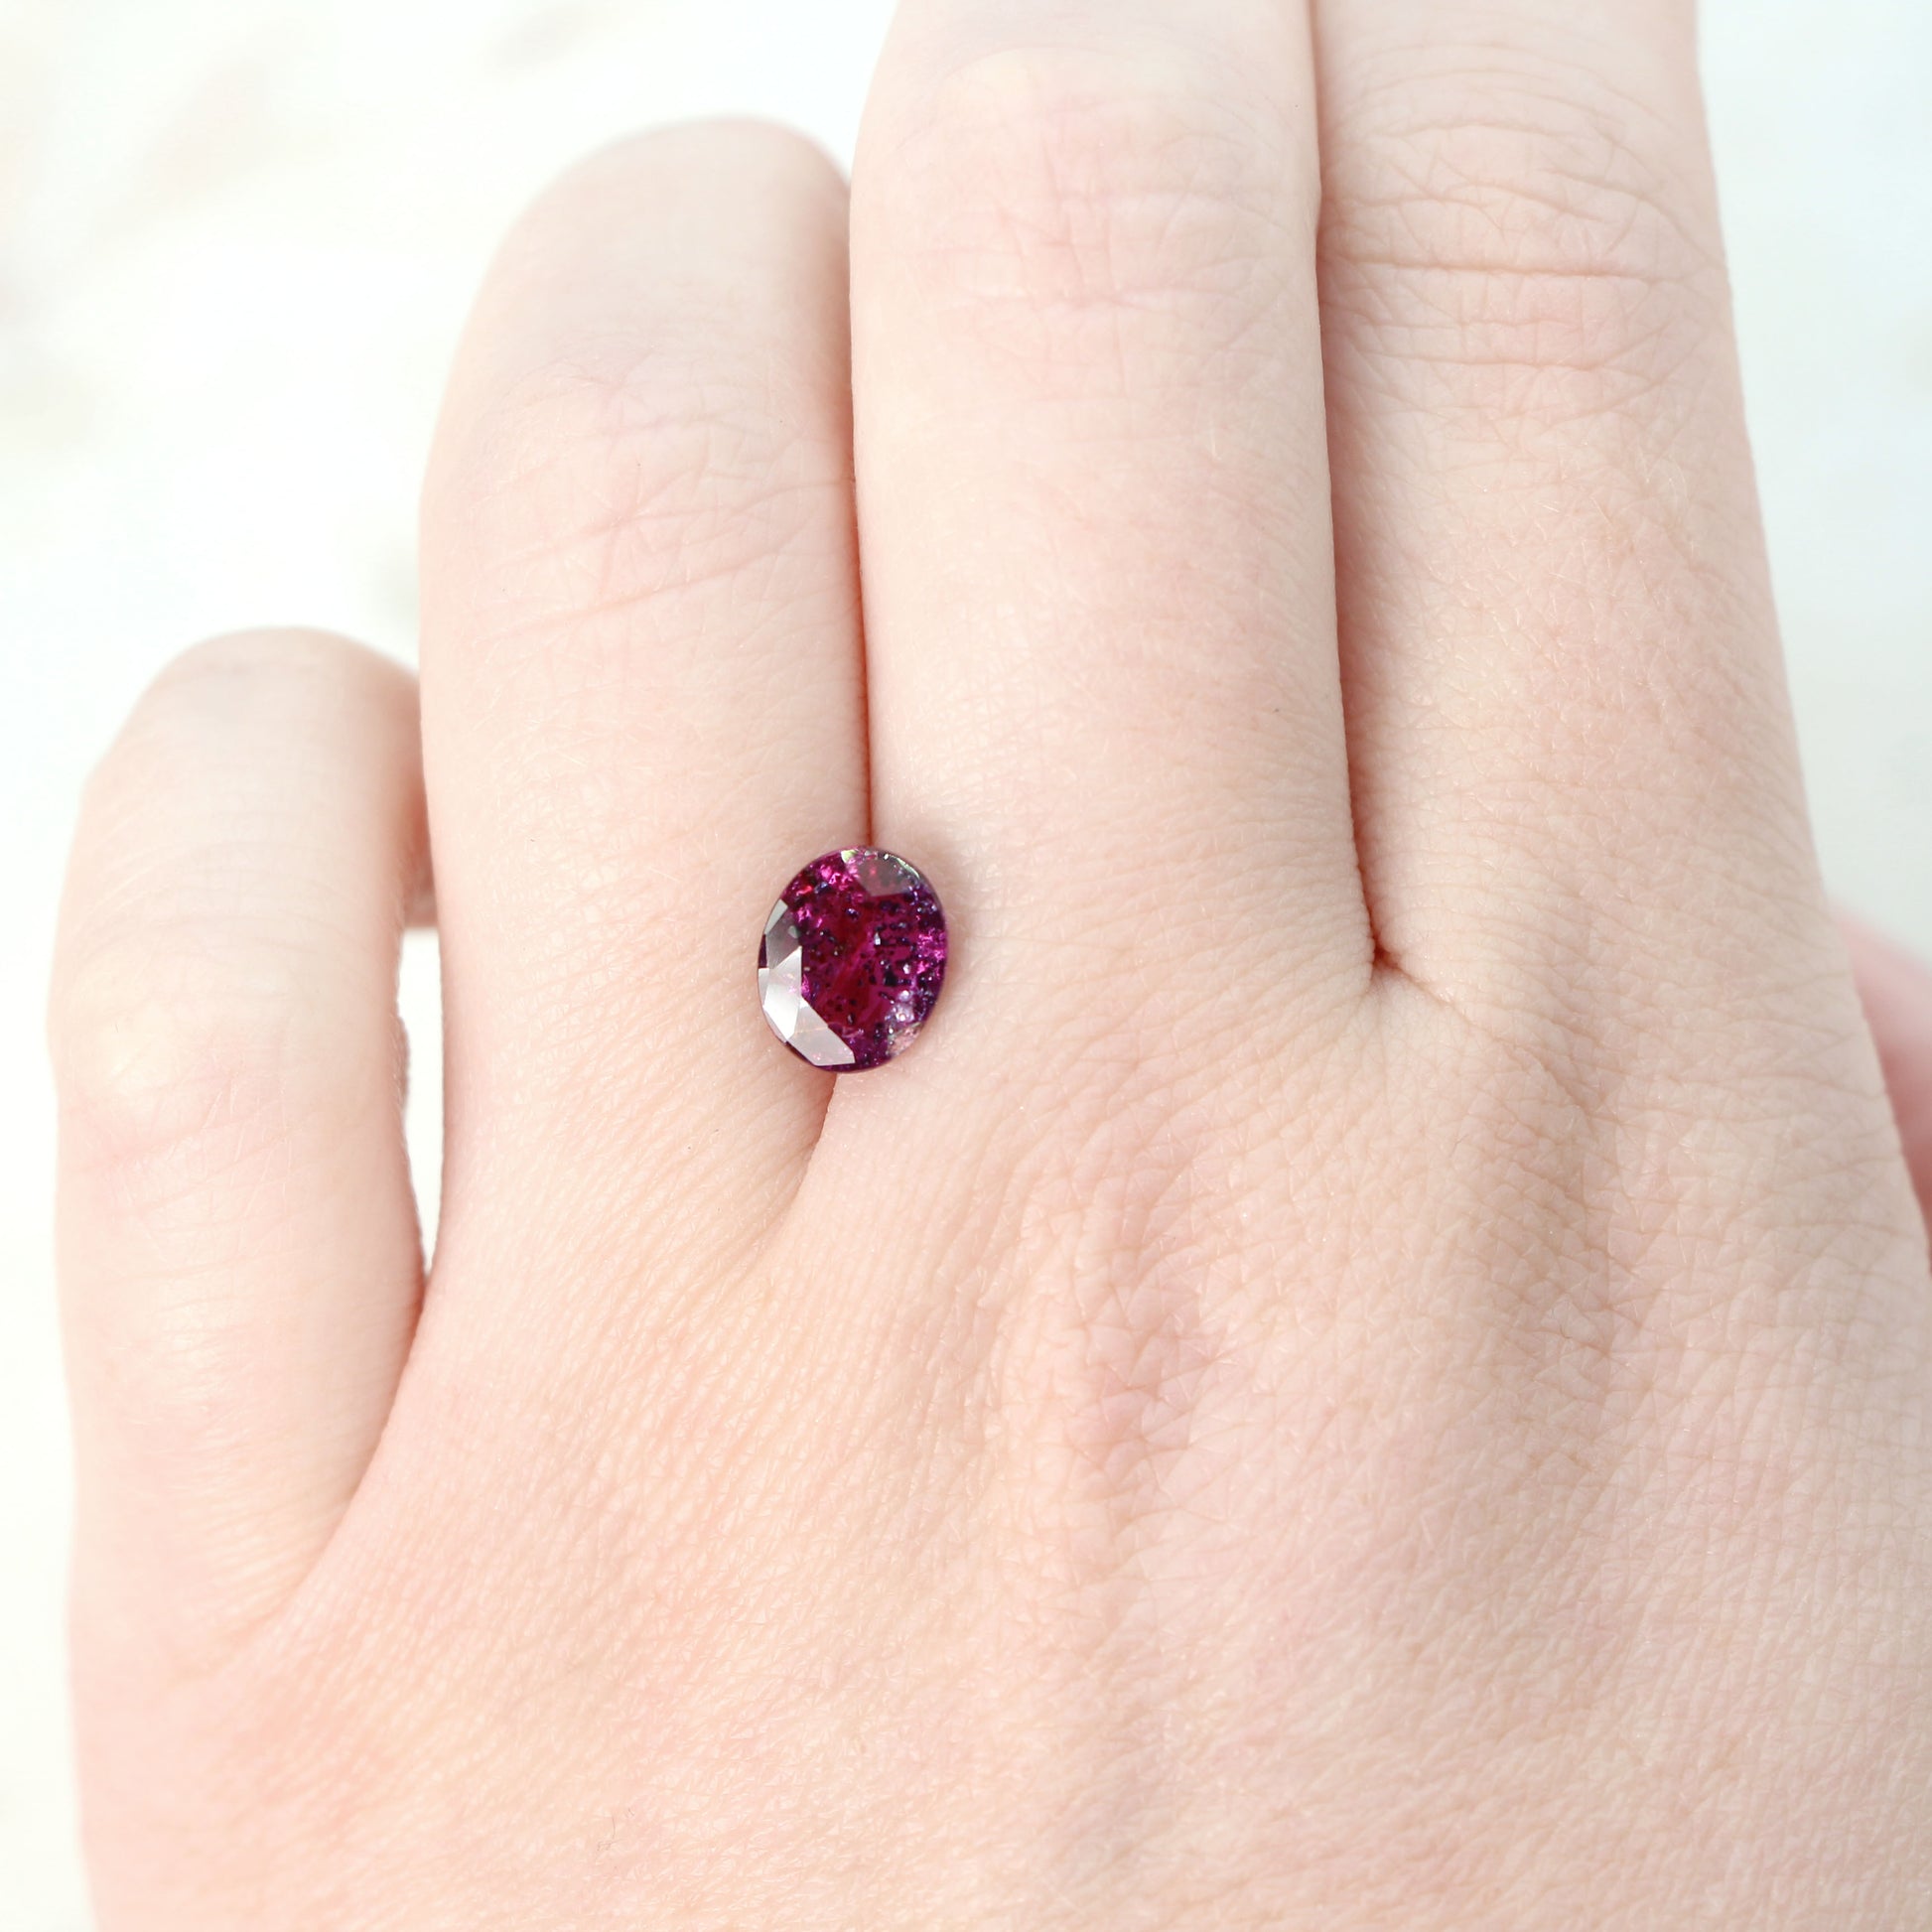 2.28 Carat Oval Purple Red Madagascar Ruby for Custom Work - Inventory Code POSAP228 - Midwinter Co. Alternative Bridal Rings and Modern Fine Jewelry